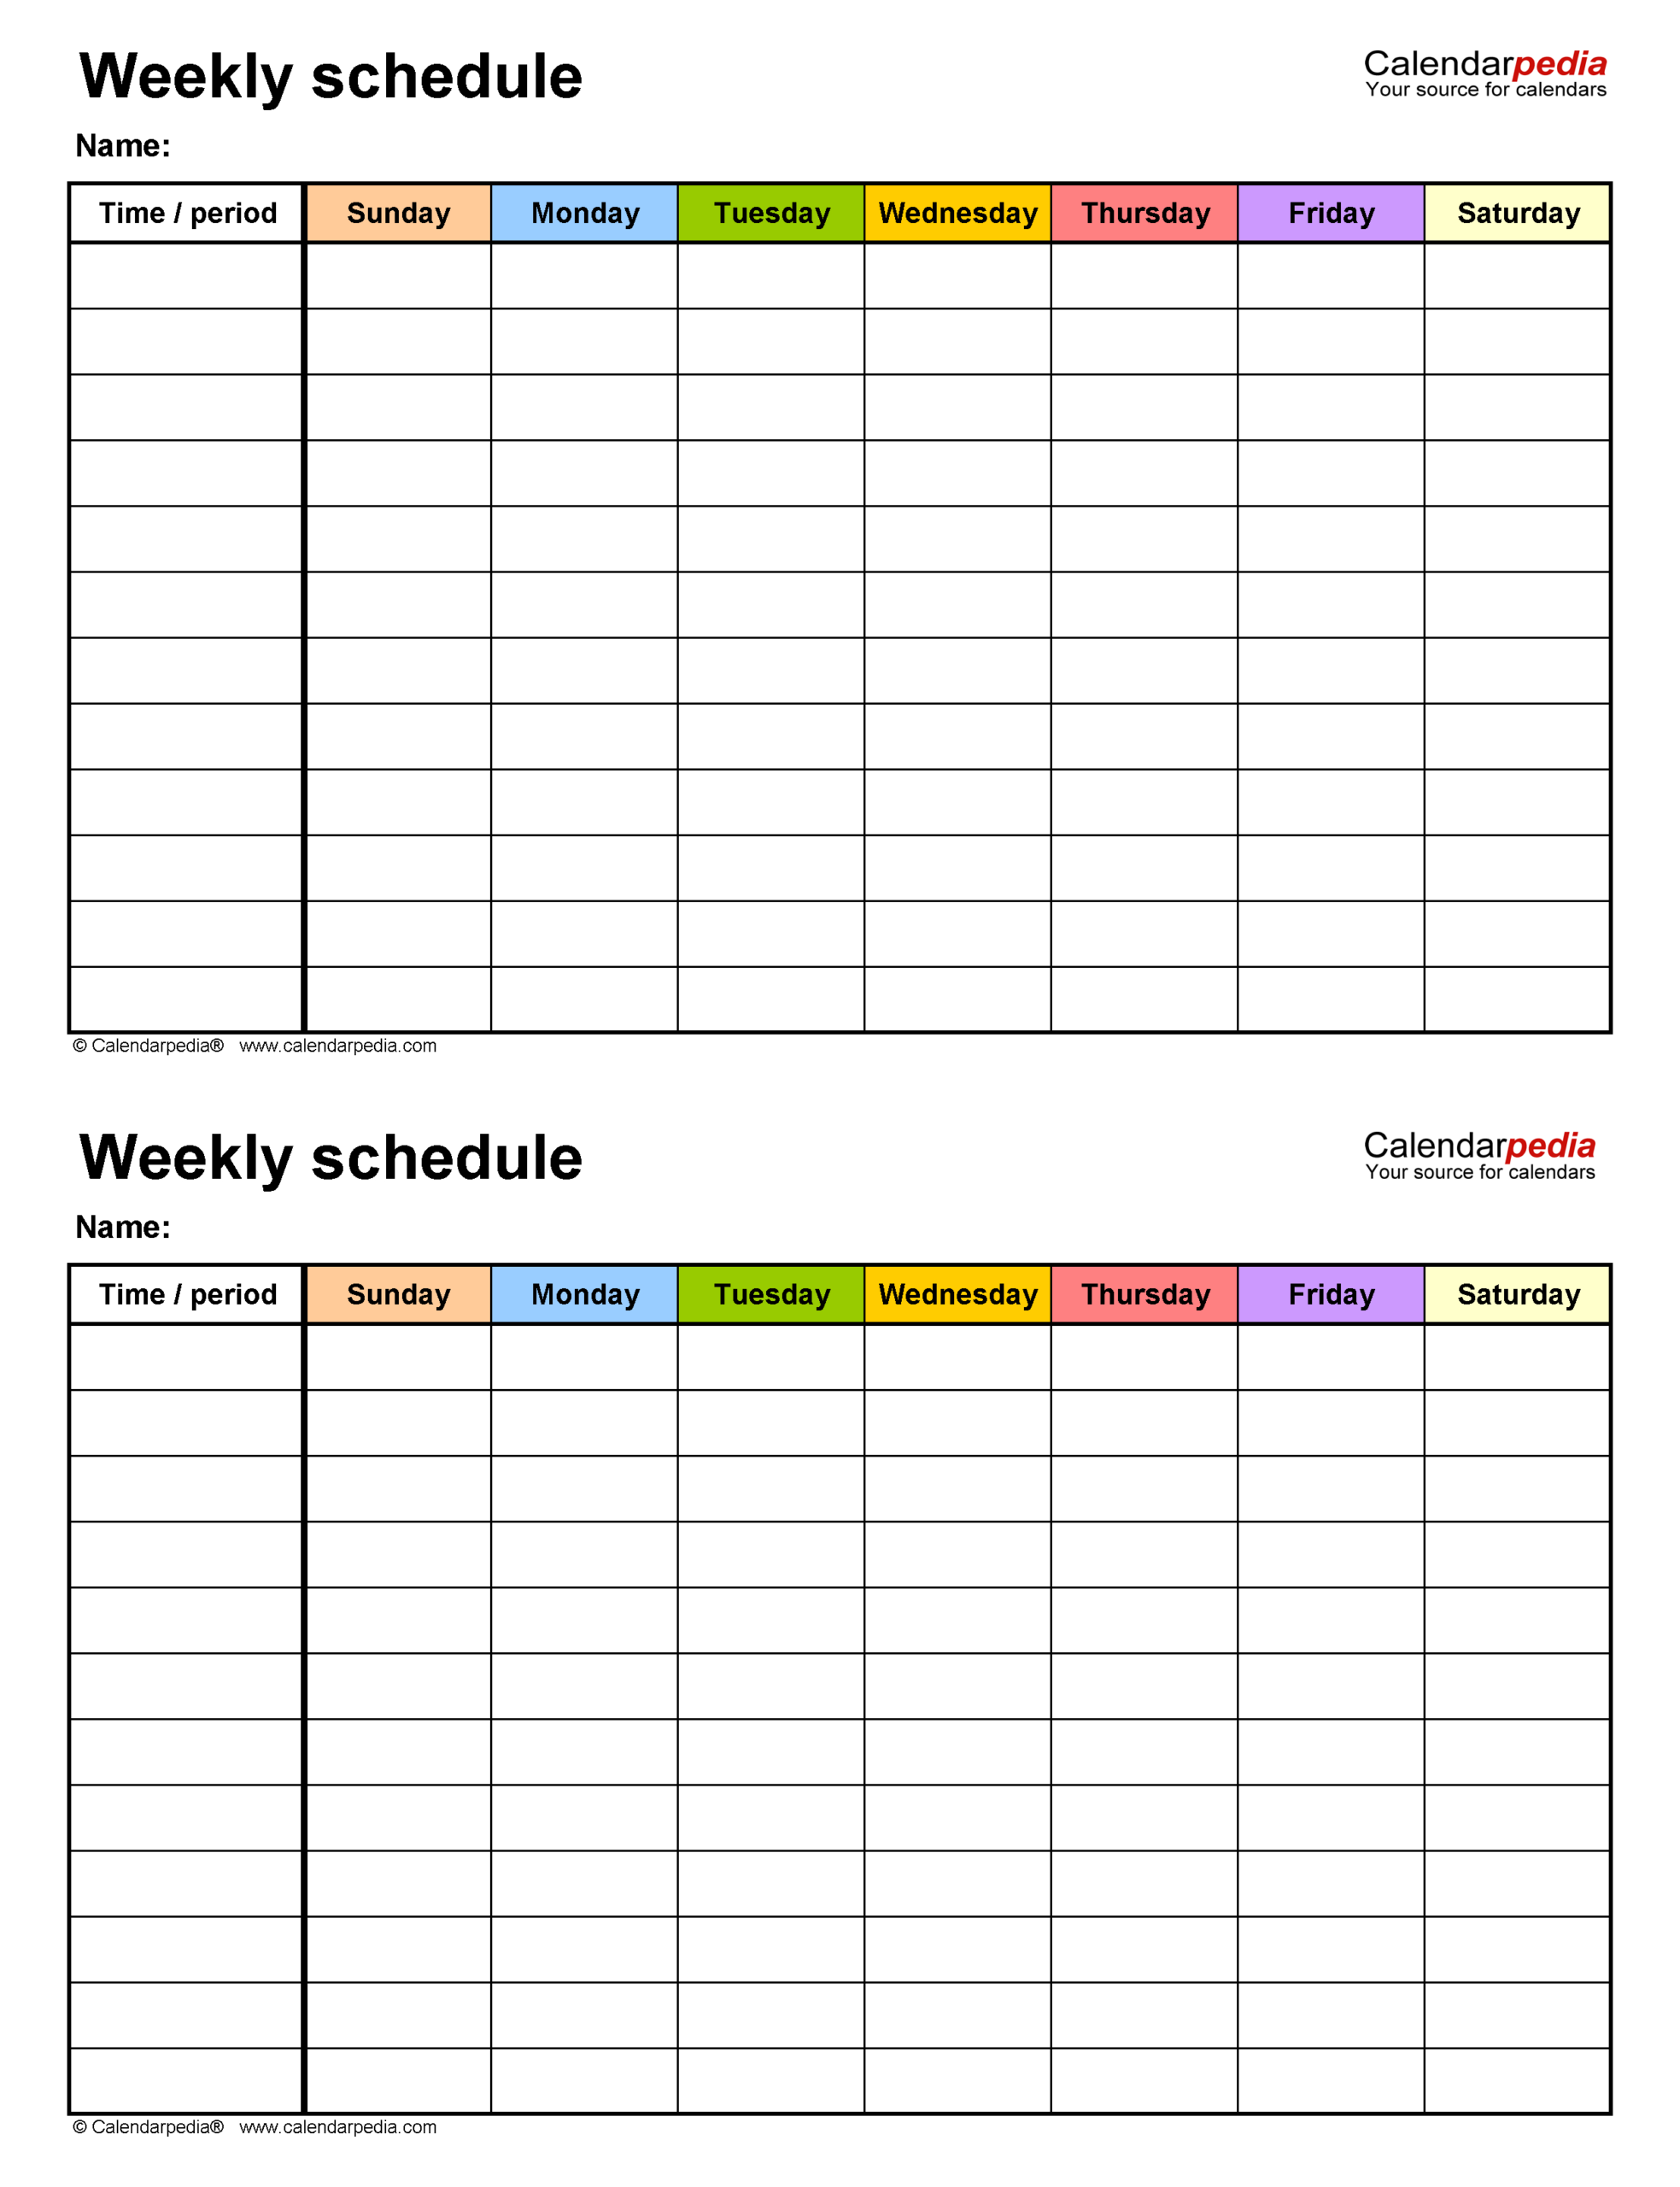 Free Weekly Schedule Templates For Excel  18 Templates throughout Monday Through Friday Calendar Template Excel